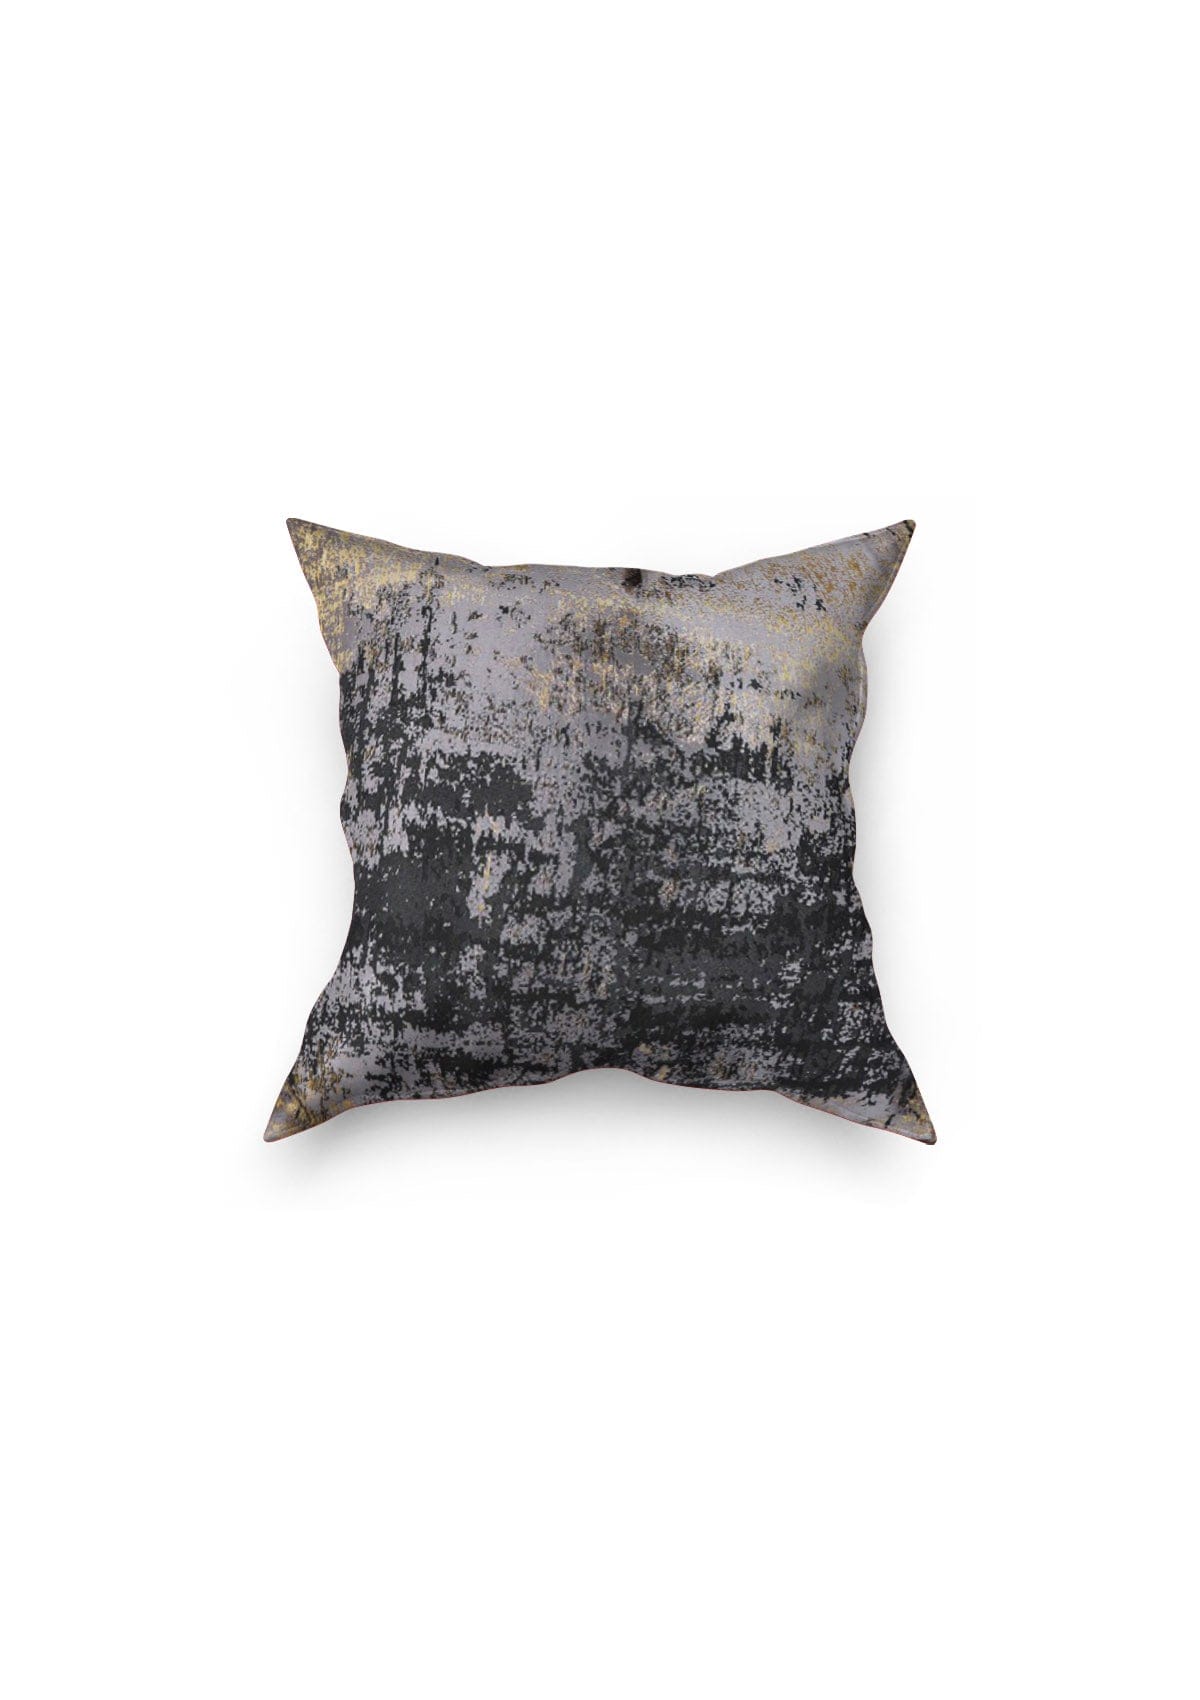 Black and Gold Cushion Covers | CovermyCushion